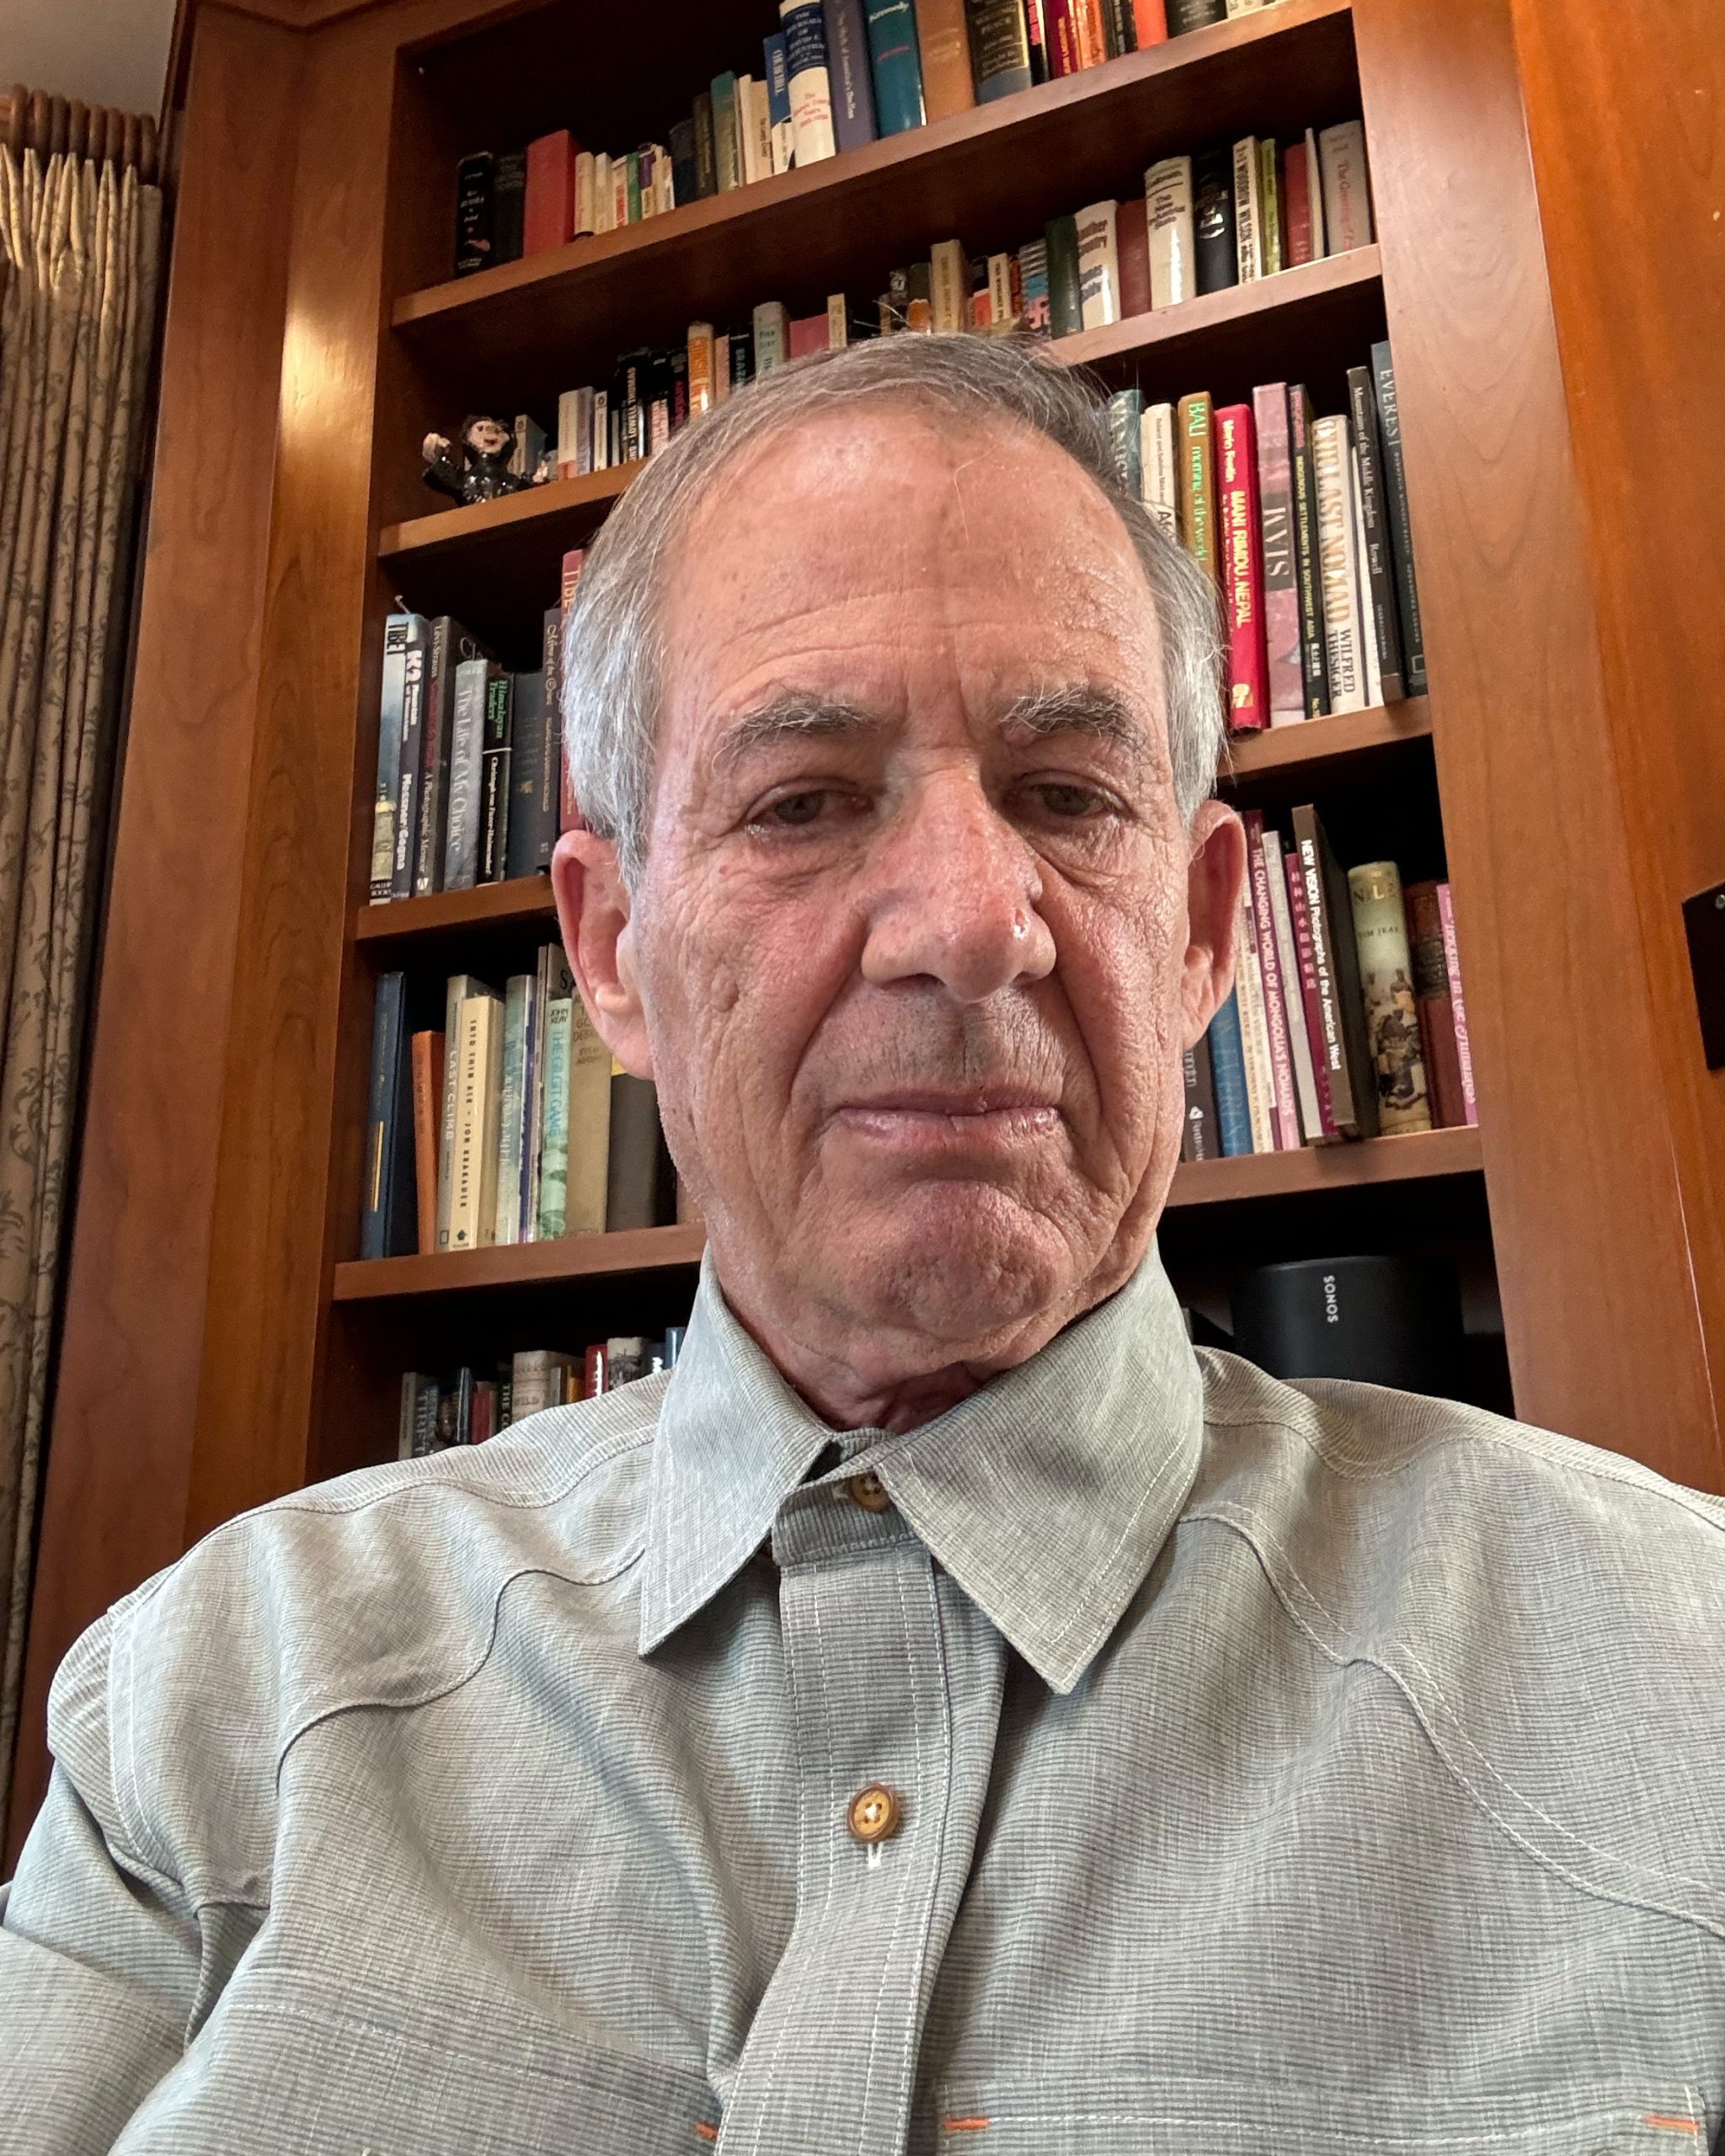 Elderly man in a gray shirt sitting in front of a board and bookshelf.